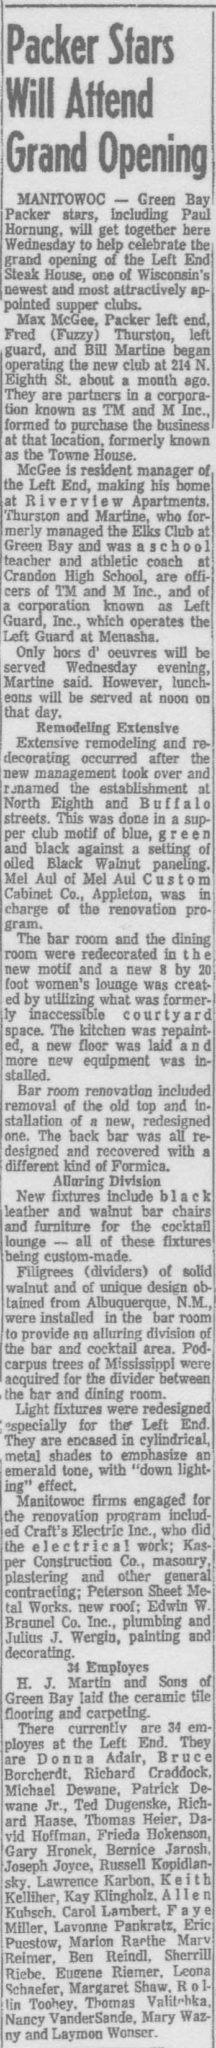 3-9-65 Grand Opening Article Detail